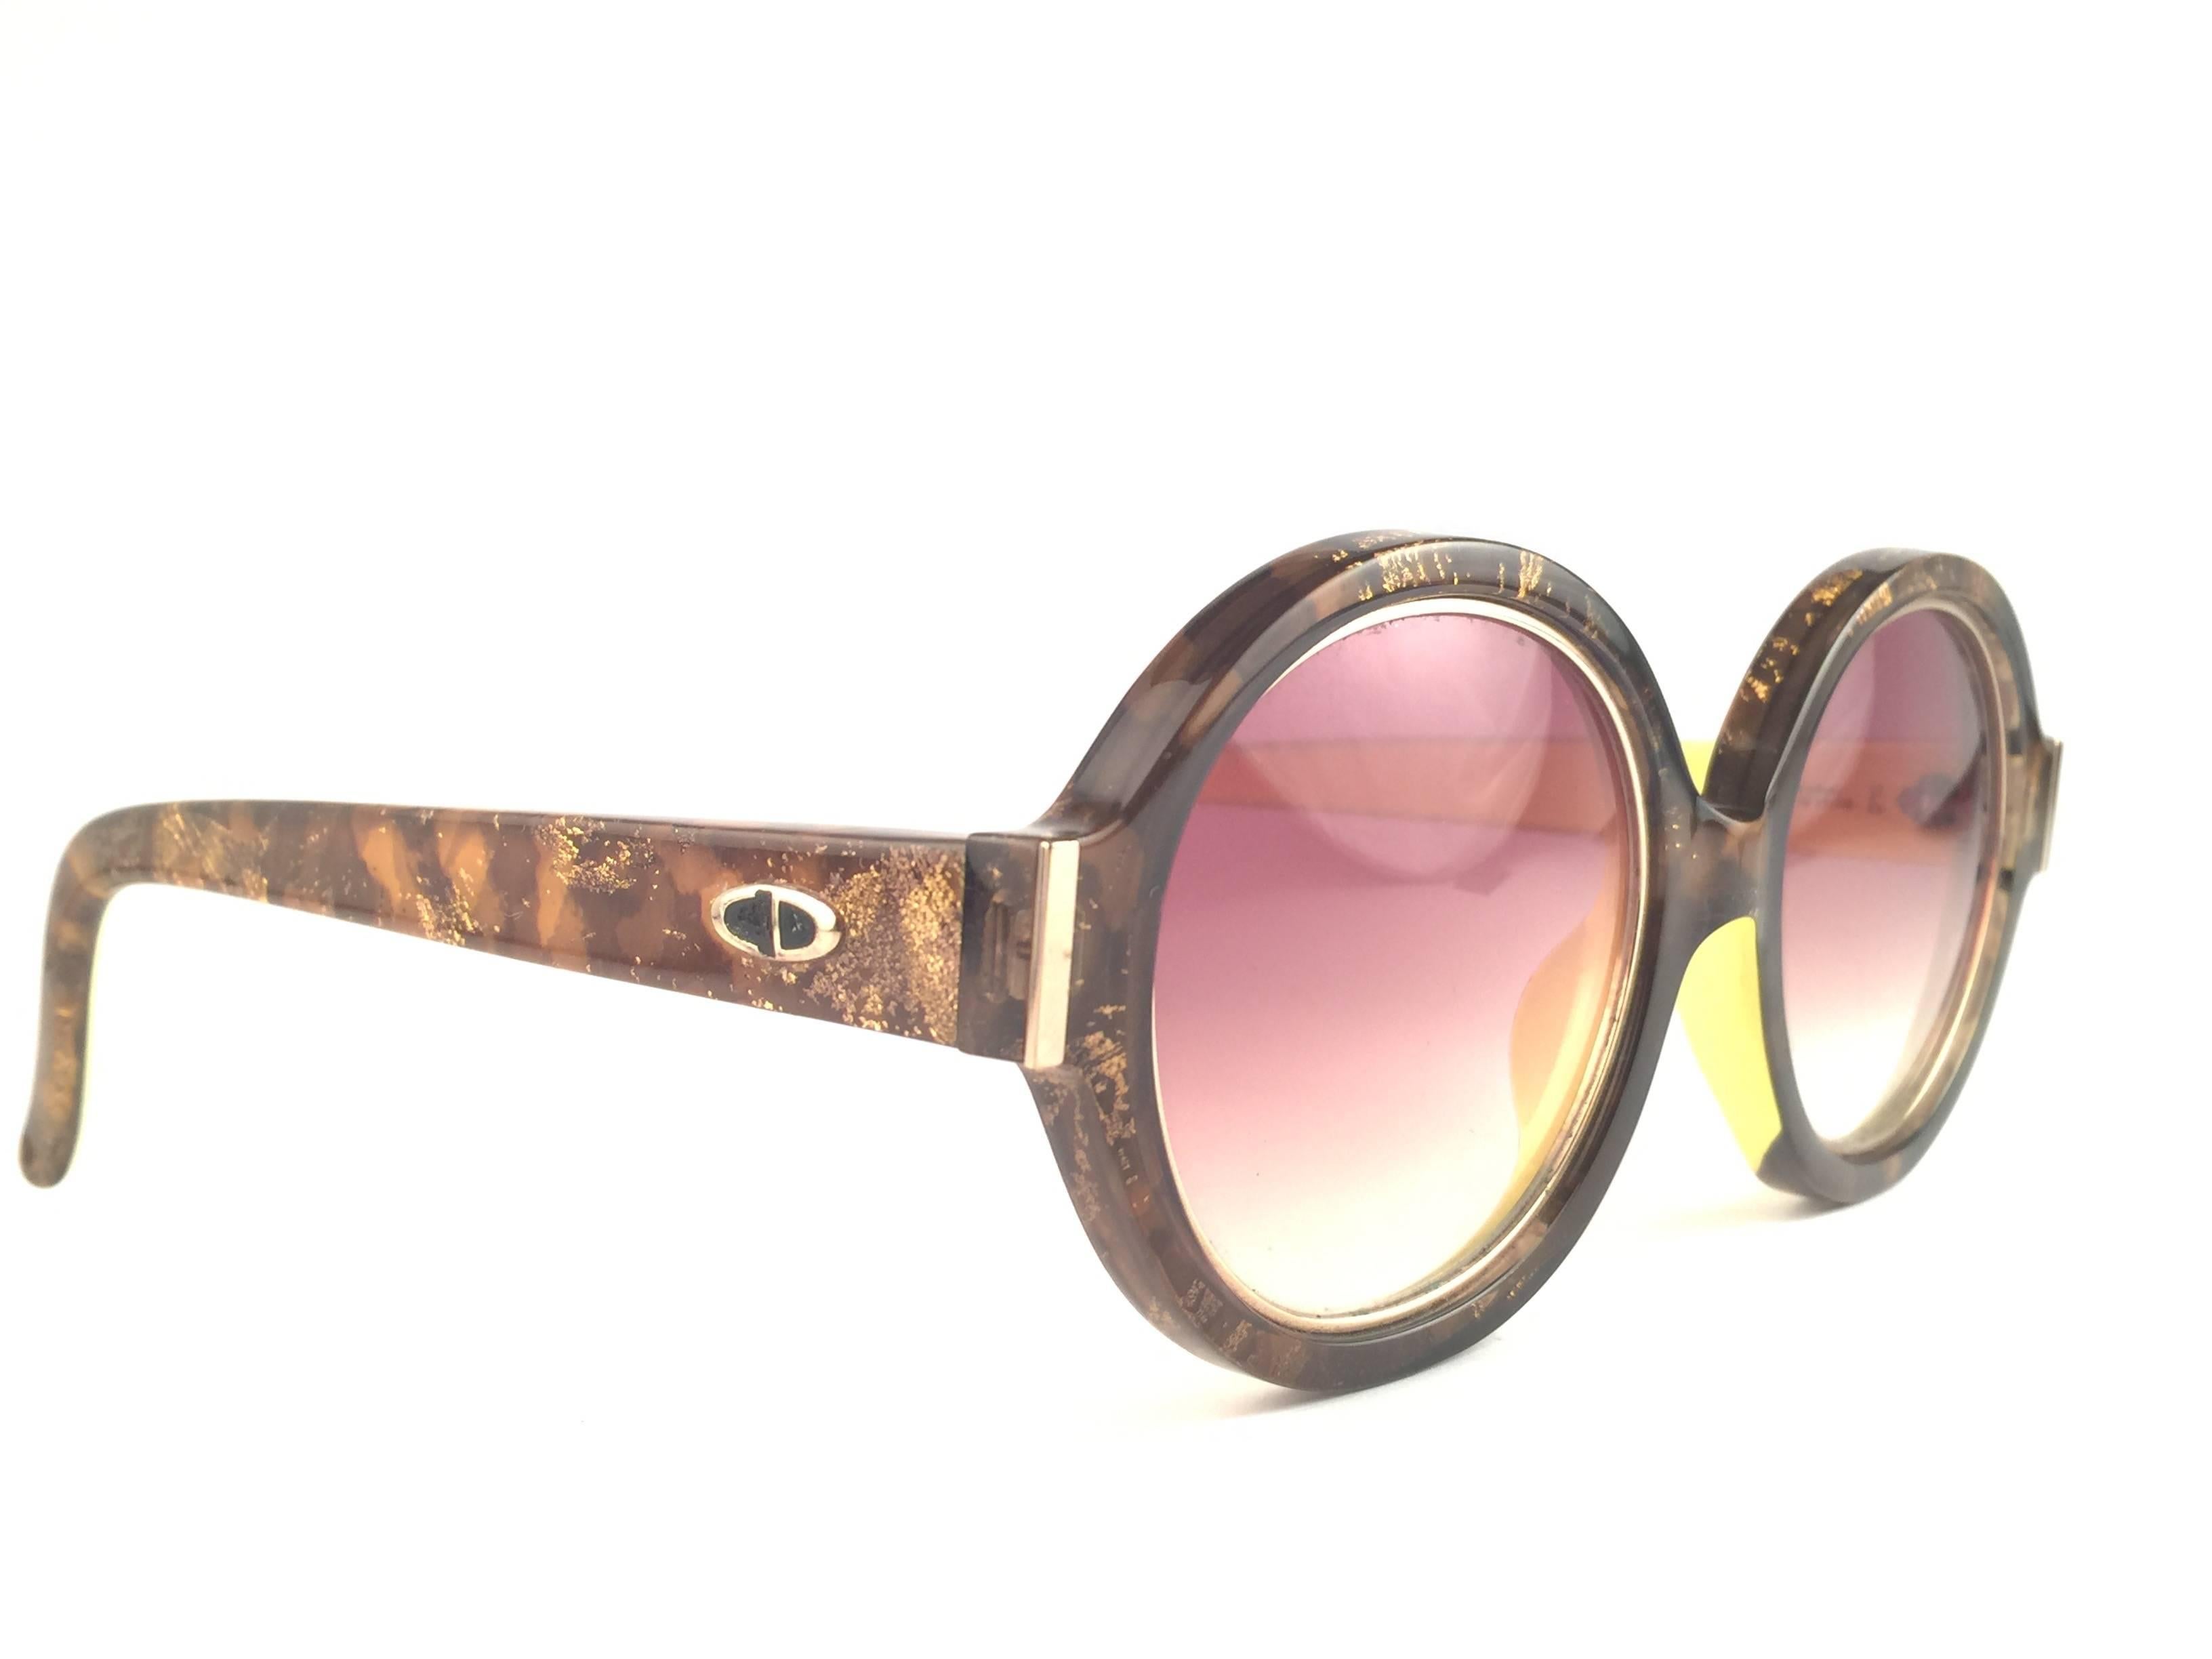 New Vintage Christian Dior 2446 20 Translucent amber mosaic with gold inserts frame sporting spotless brown gradient lenses. 

Made in Germany.
 
Produced and design in 1970's.

A collector’s piece!

New, never worn or displayed. Comes with its